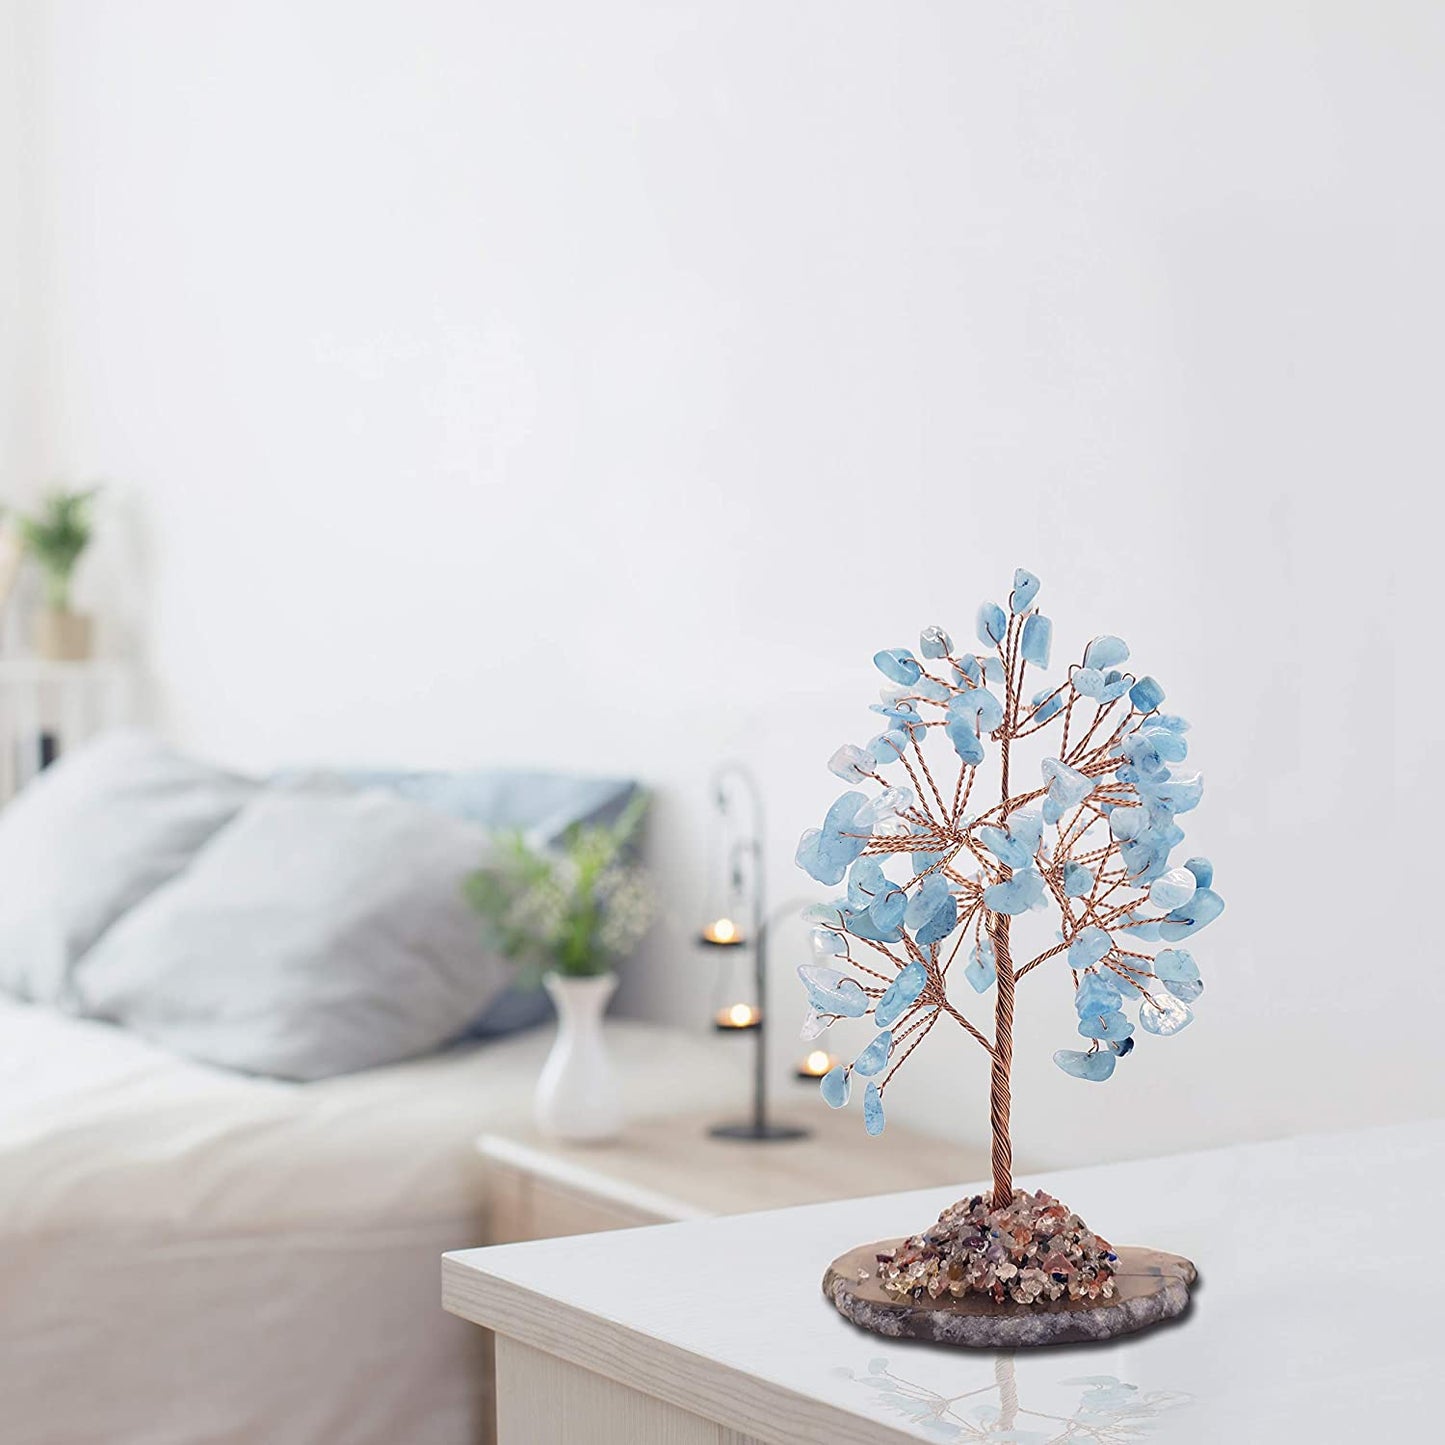 Healing Crystals Tree / Bonsai Tree for Home Decor, Room Decor and Office Desk, Spiritual Gifts for Energy Healing, Good Luck Gifts for Wealth & Prosperity, and Decorative Home Accessories